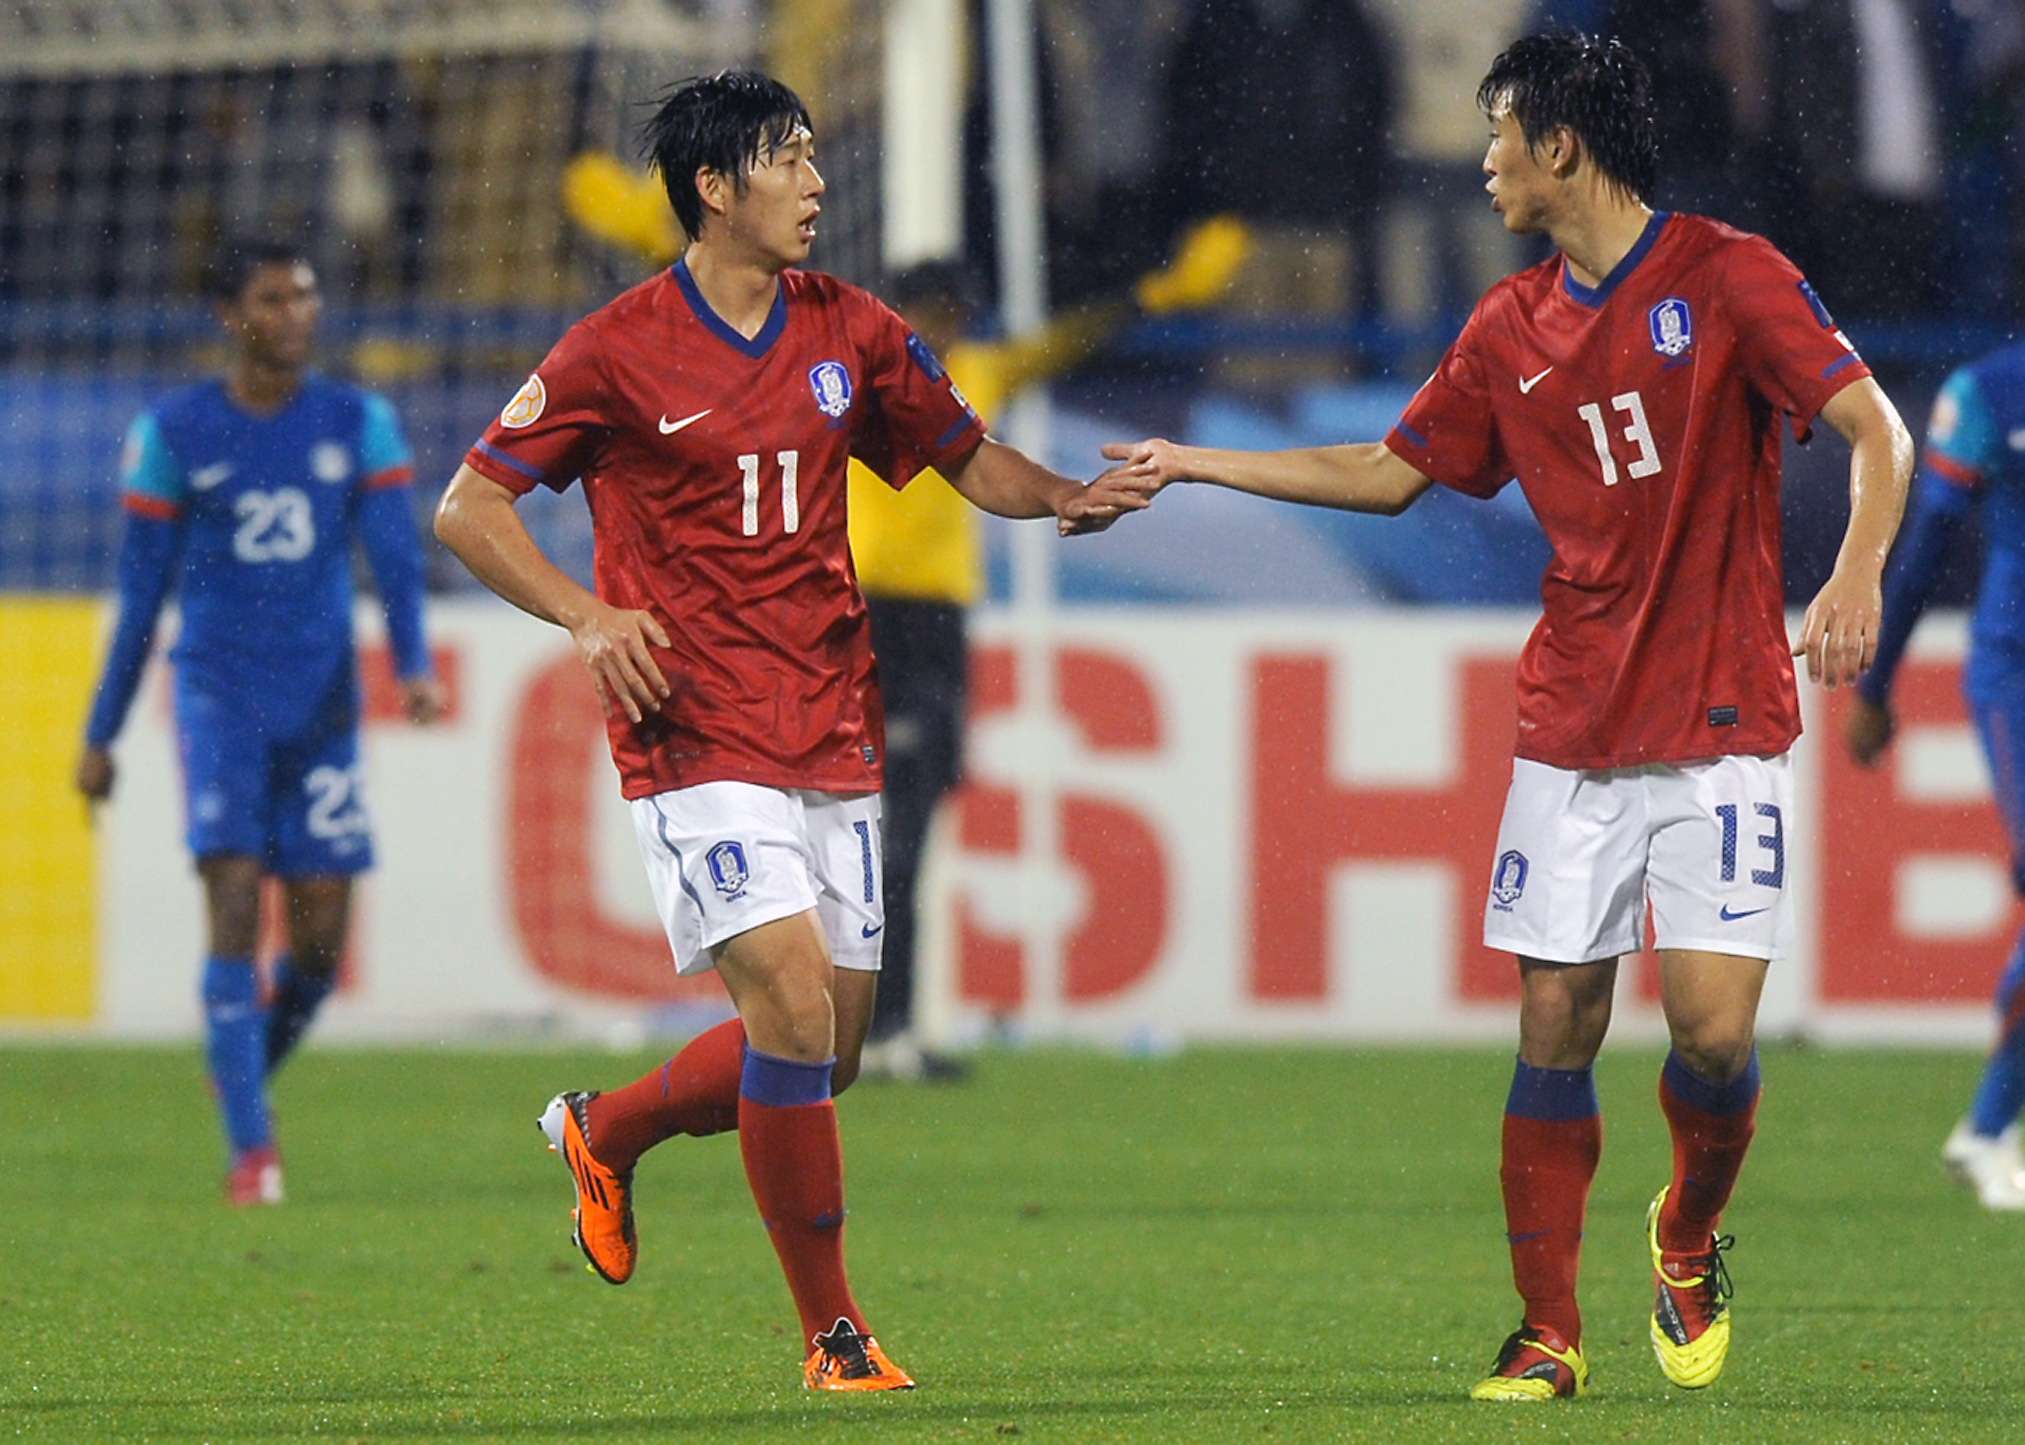 Son Heung-min scoring against India for South Korea 2011 Asian Cup